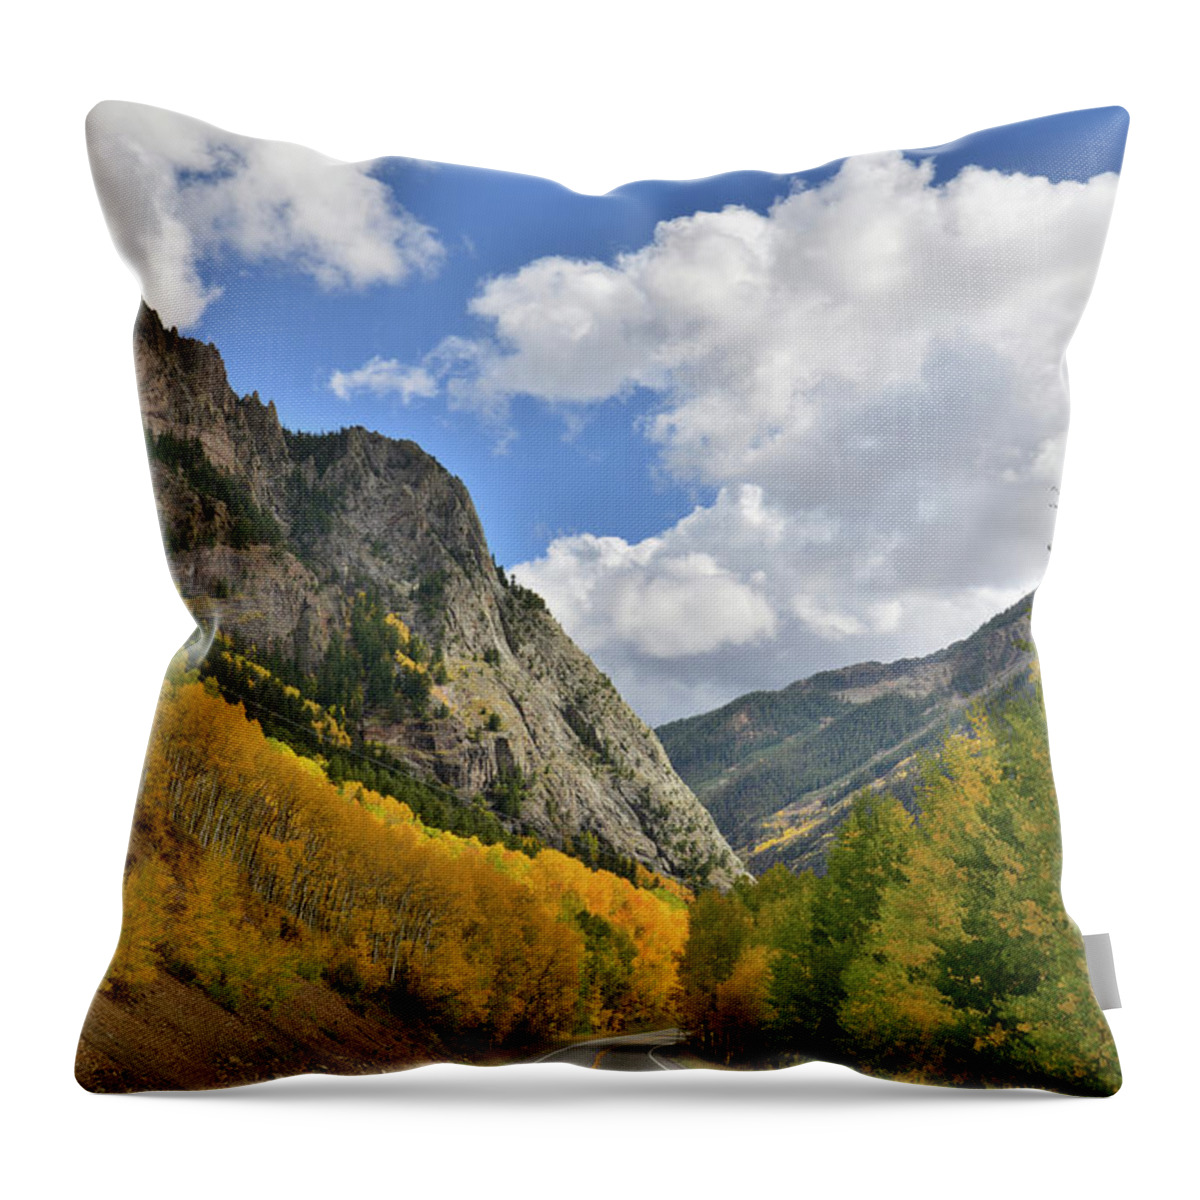 Colorado Throw Pillow featuring the photograph Highway 145 Colorado by Ray Mathis